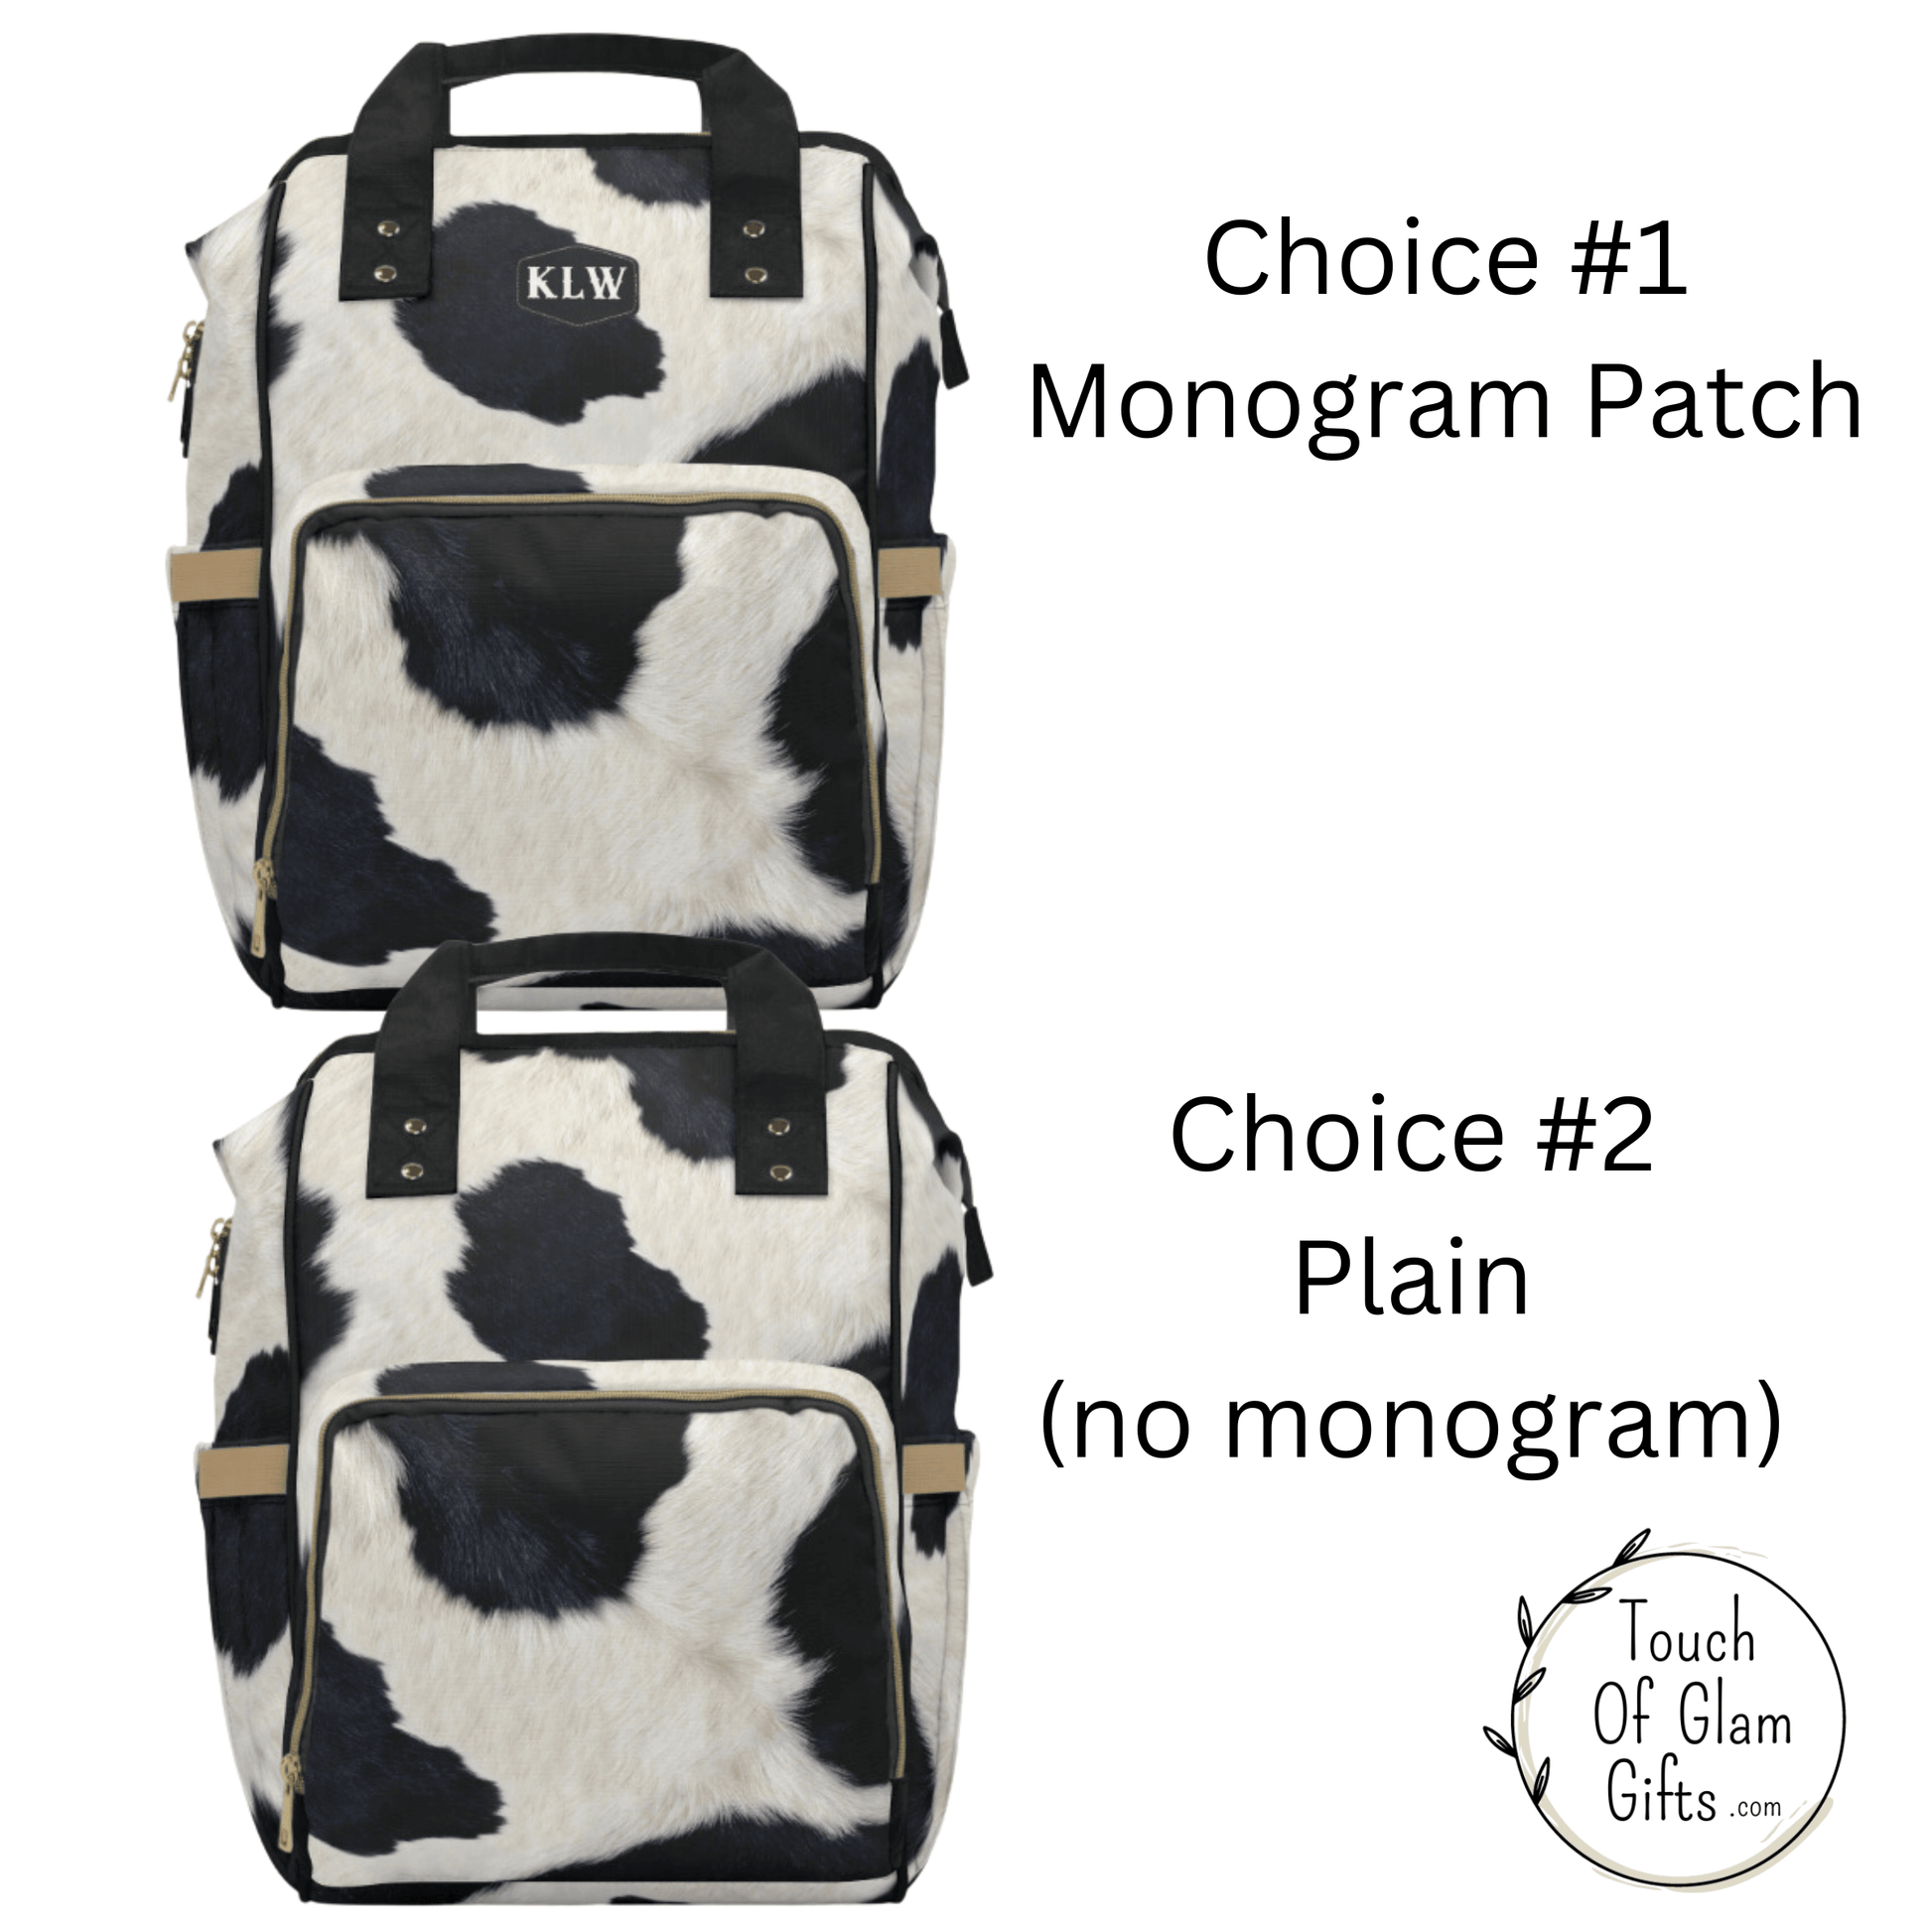 You can choose to get a monogrammed patch with up to three initials or enjoy the cow print backpack plain with no monogram.